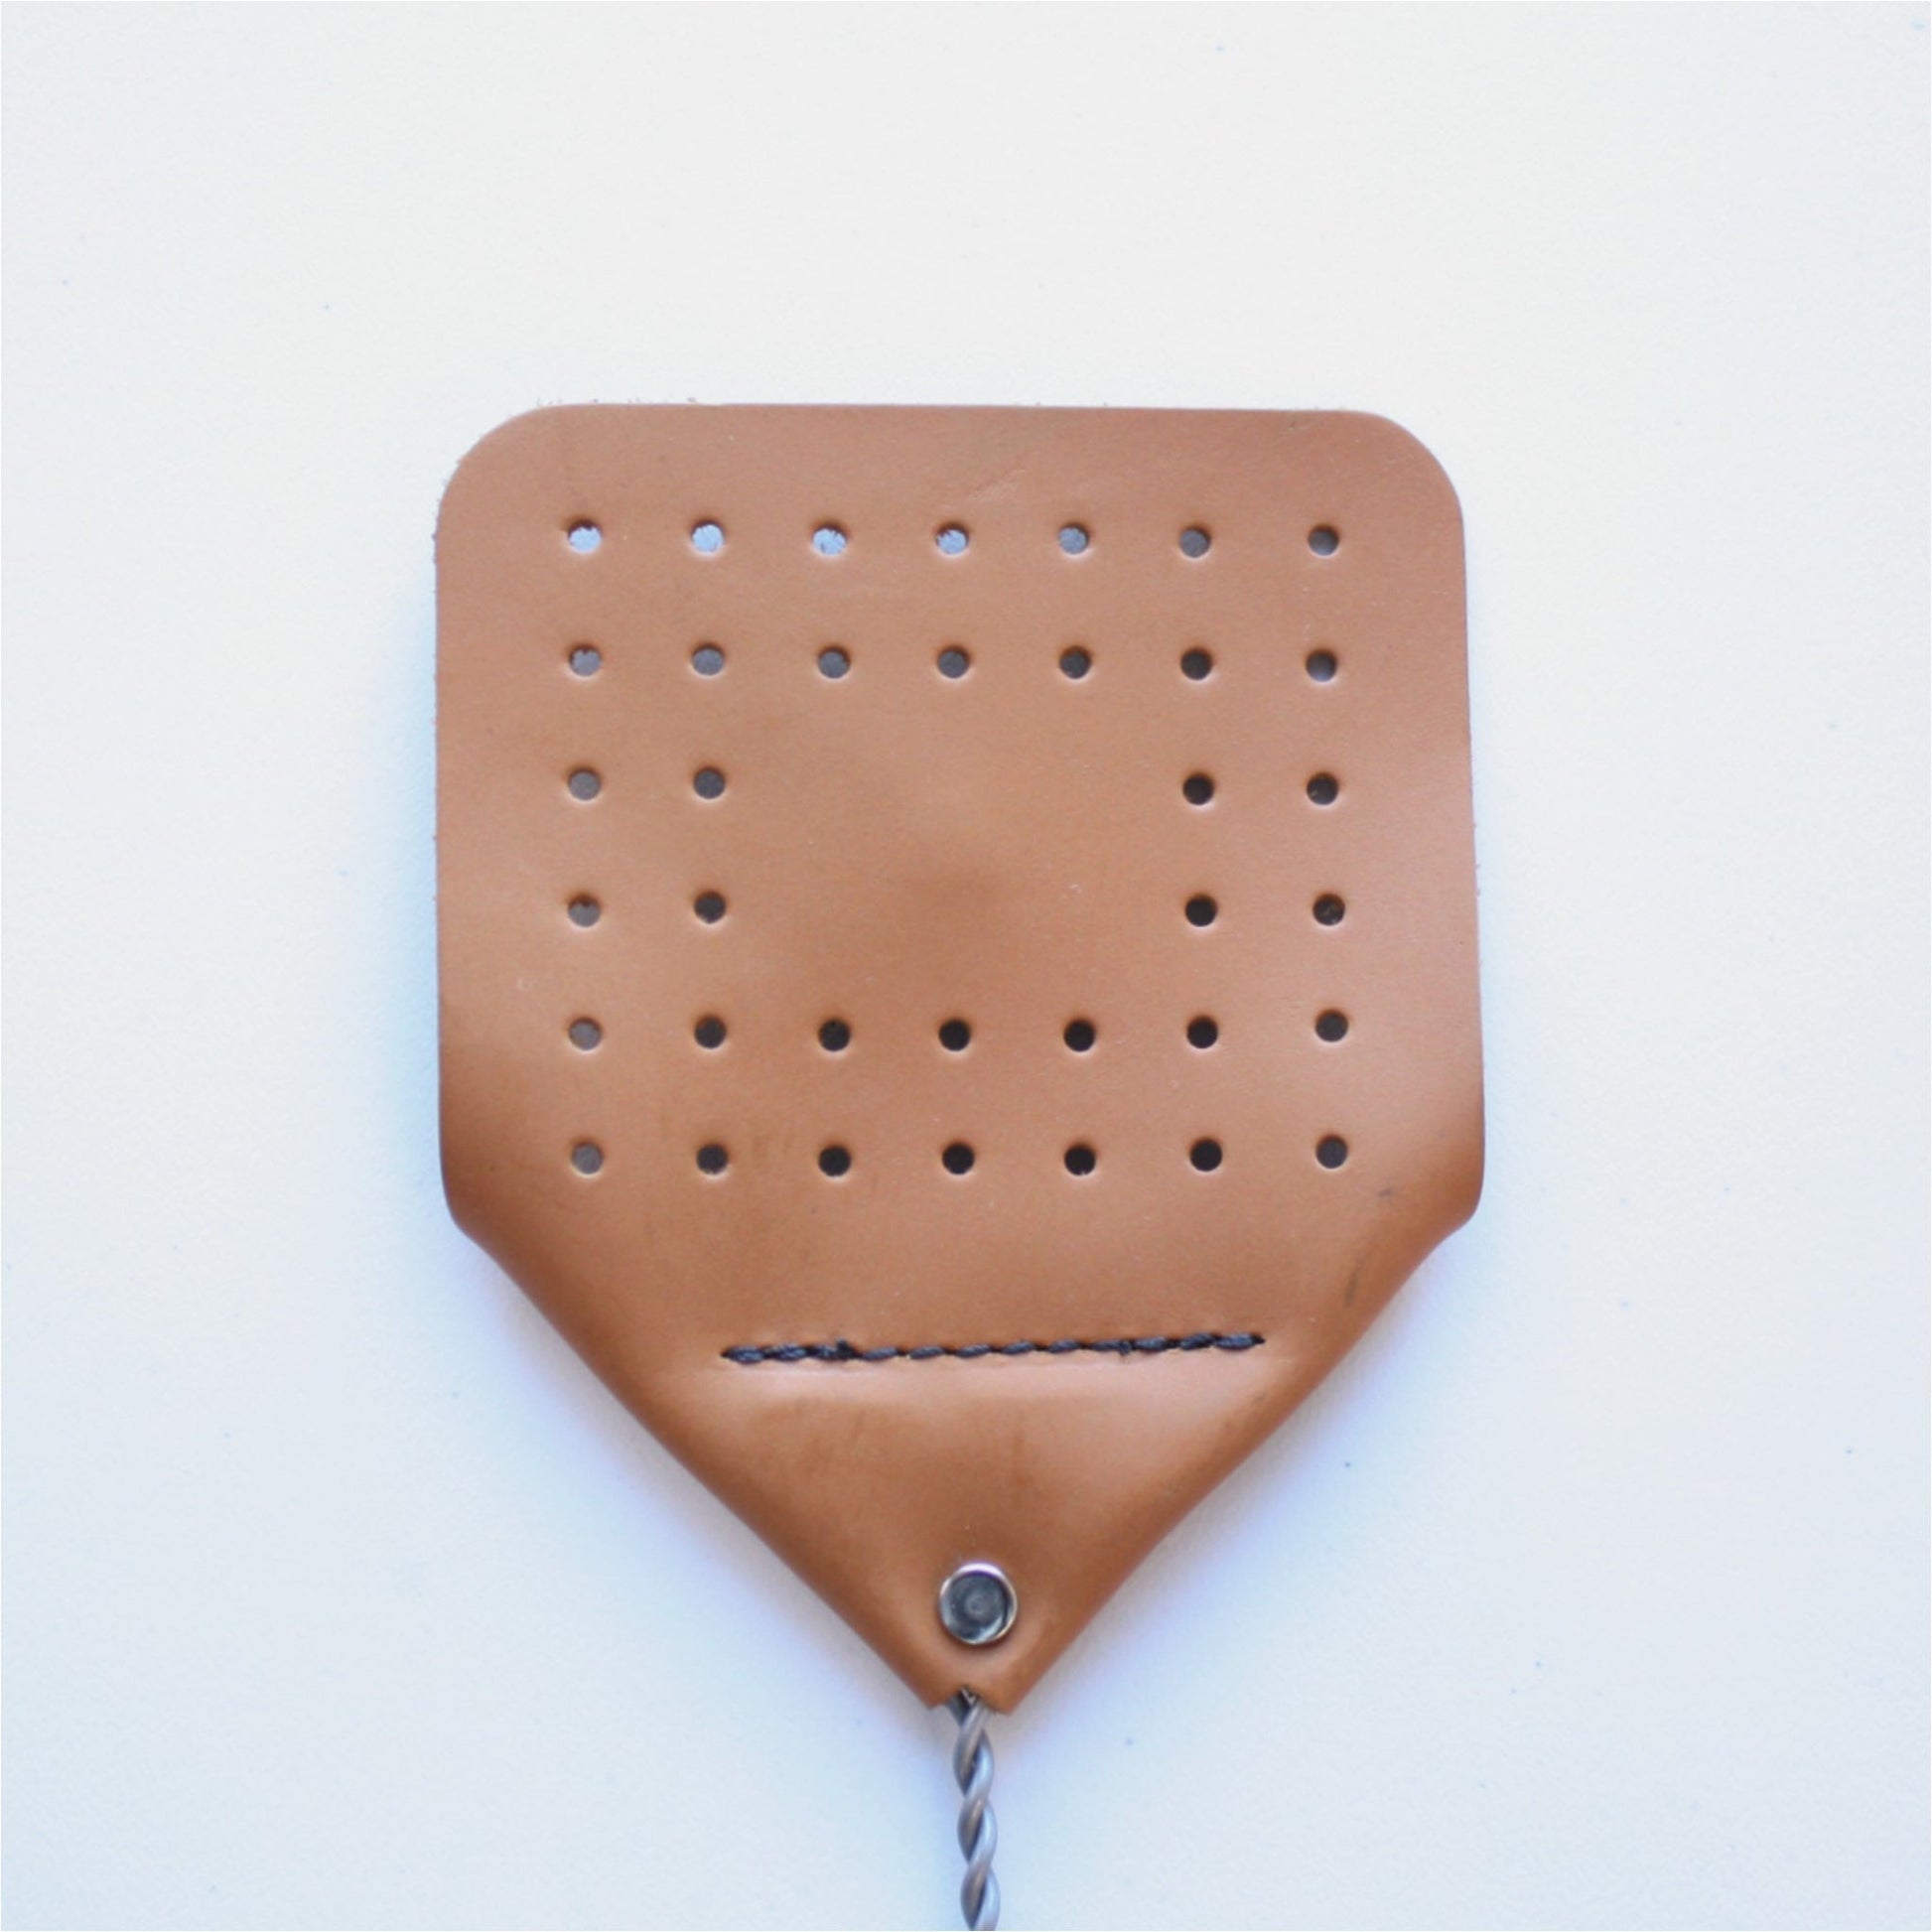 Leather Flyswatter - Made in the USA